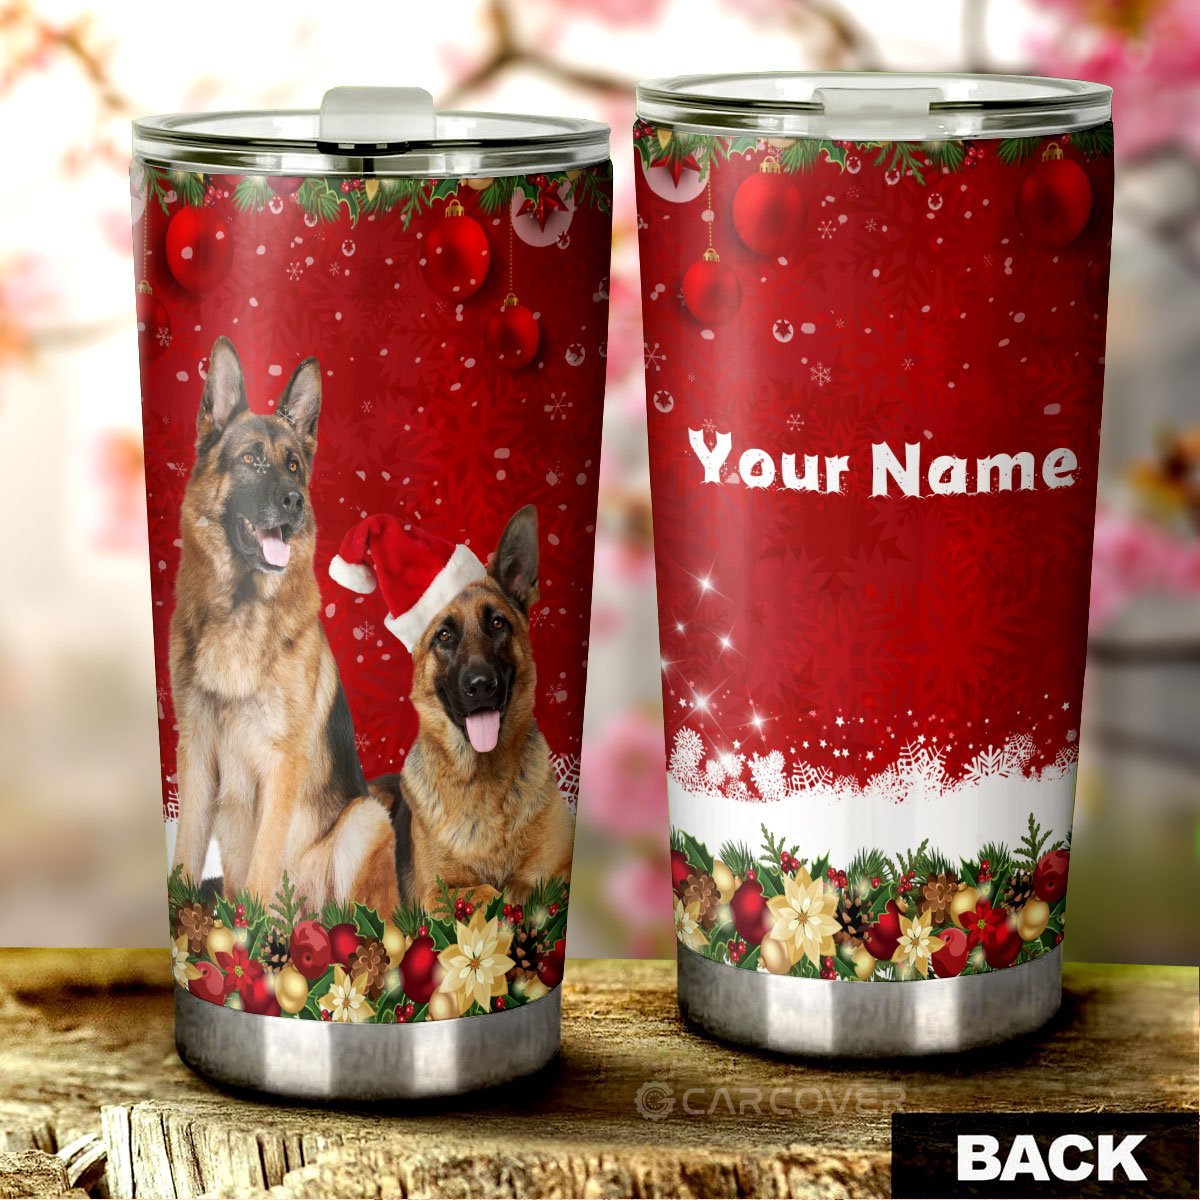 German Shepherds Tumbler Cup Custom Christmas Car Accessories For Dog Lovers - Gearcarcover - 1